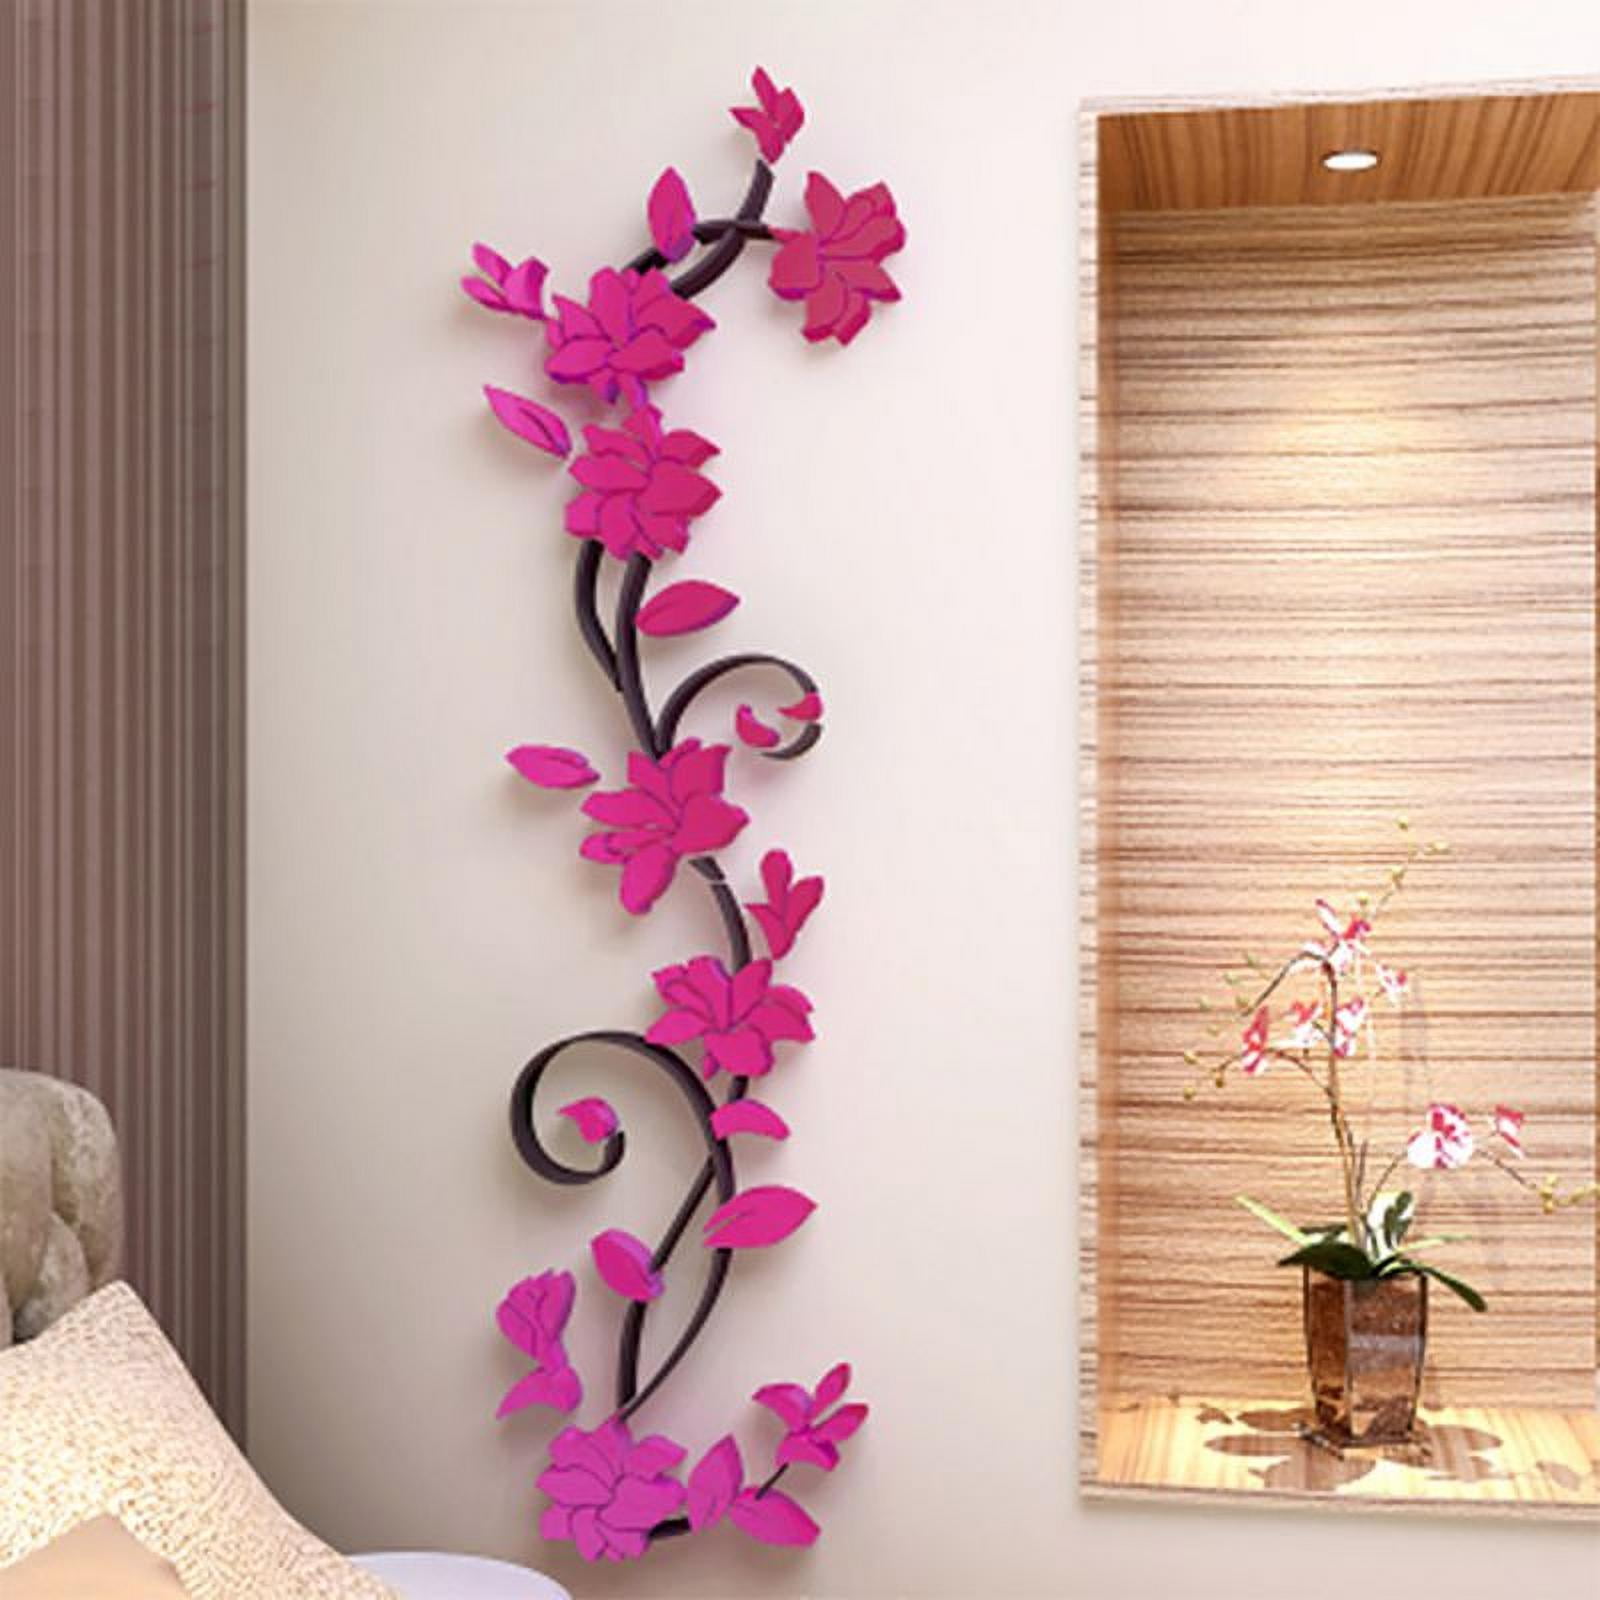 DIY 3D Flowers Tree Removable Mural PVC Decal Wall Sticker Art Room Home Decor 